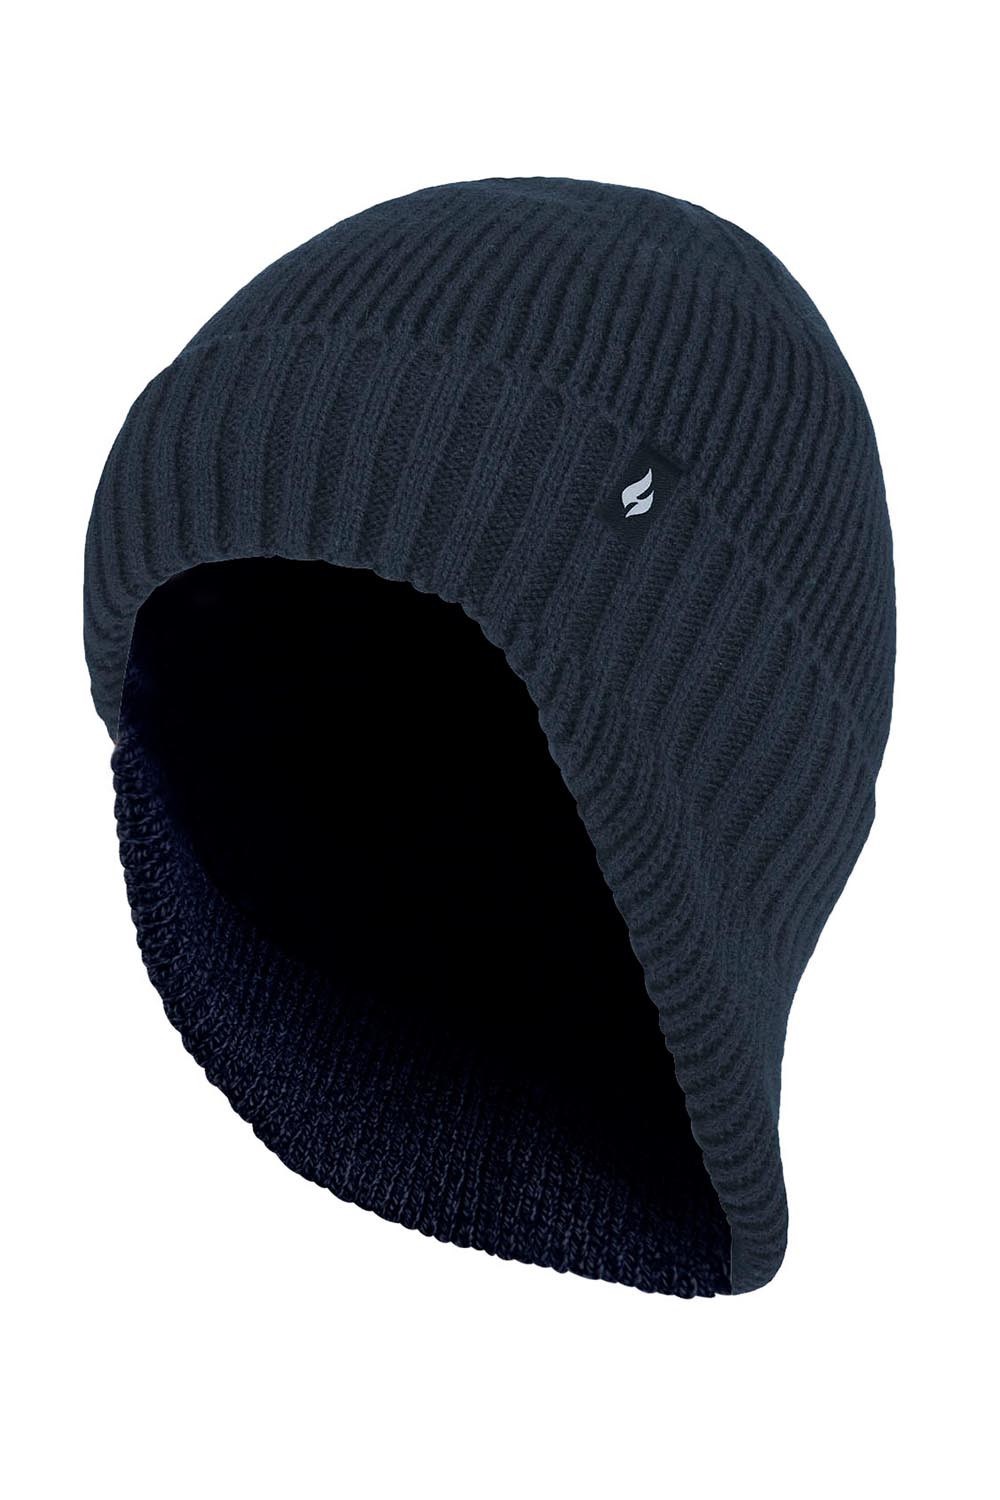 Mens Thermal Drop Neck Beanie Hat -